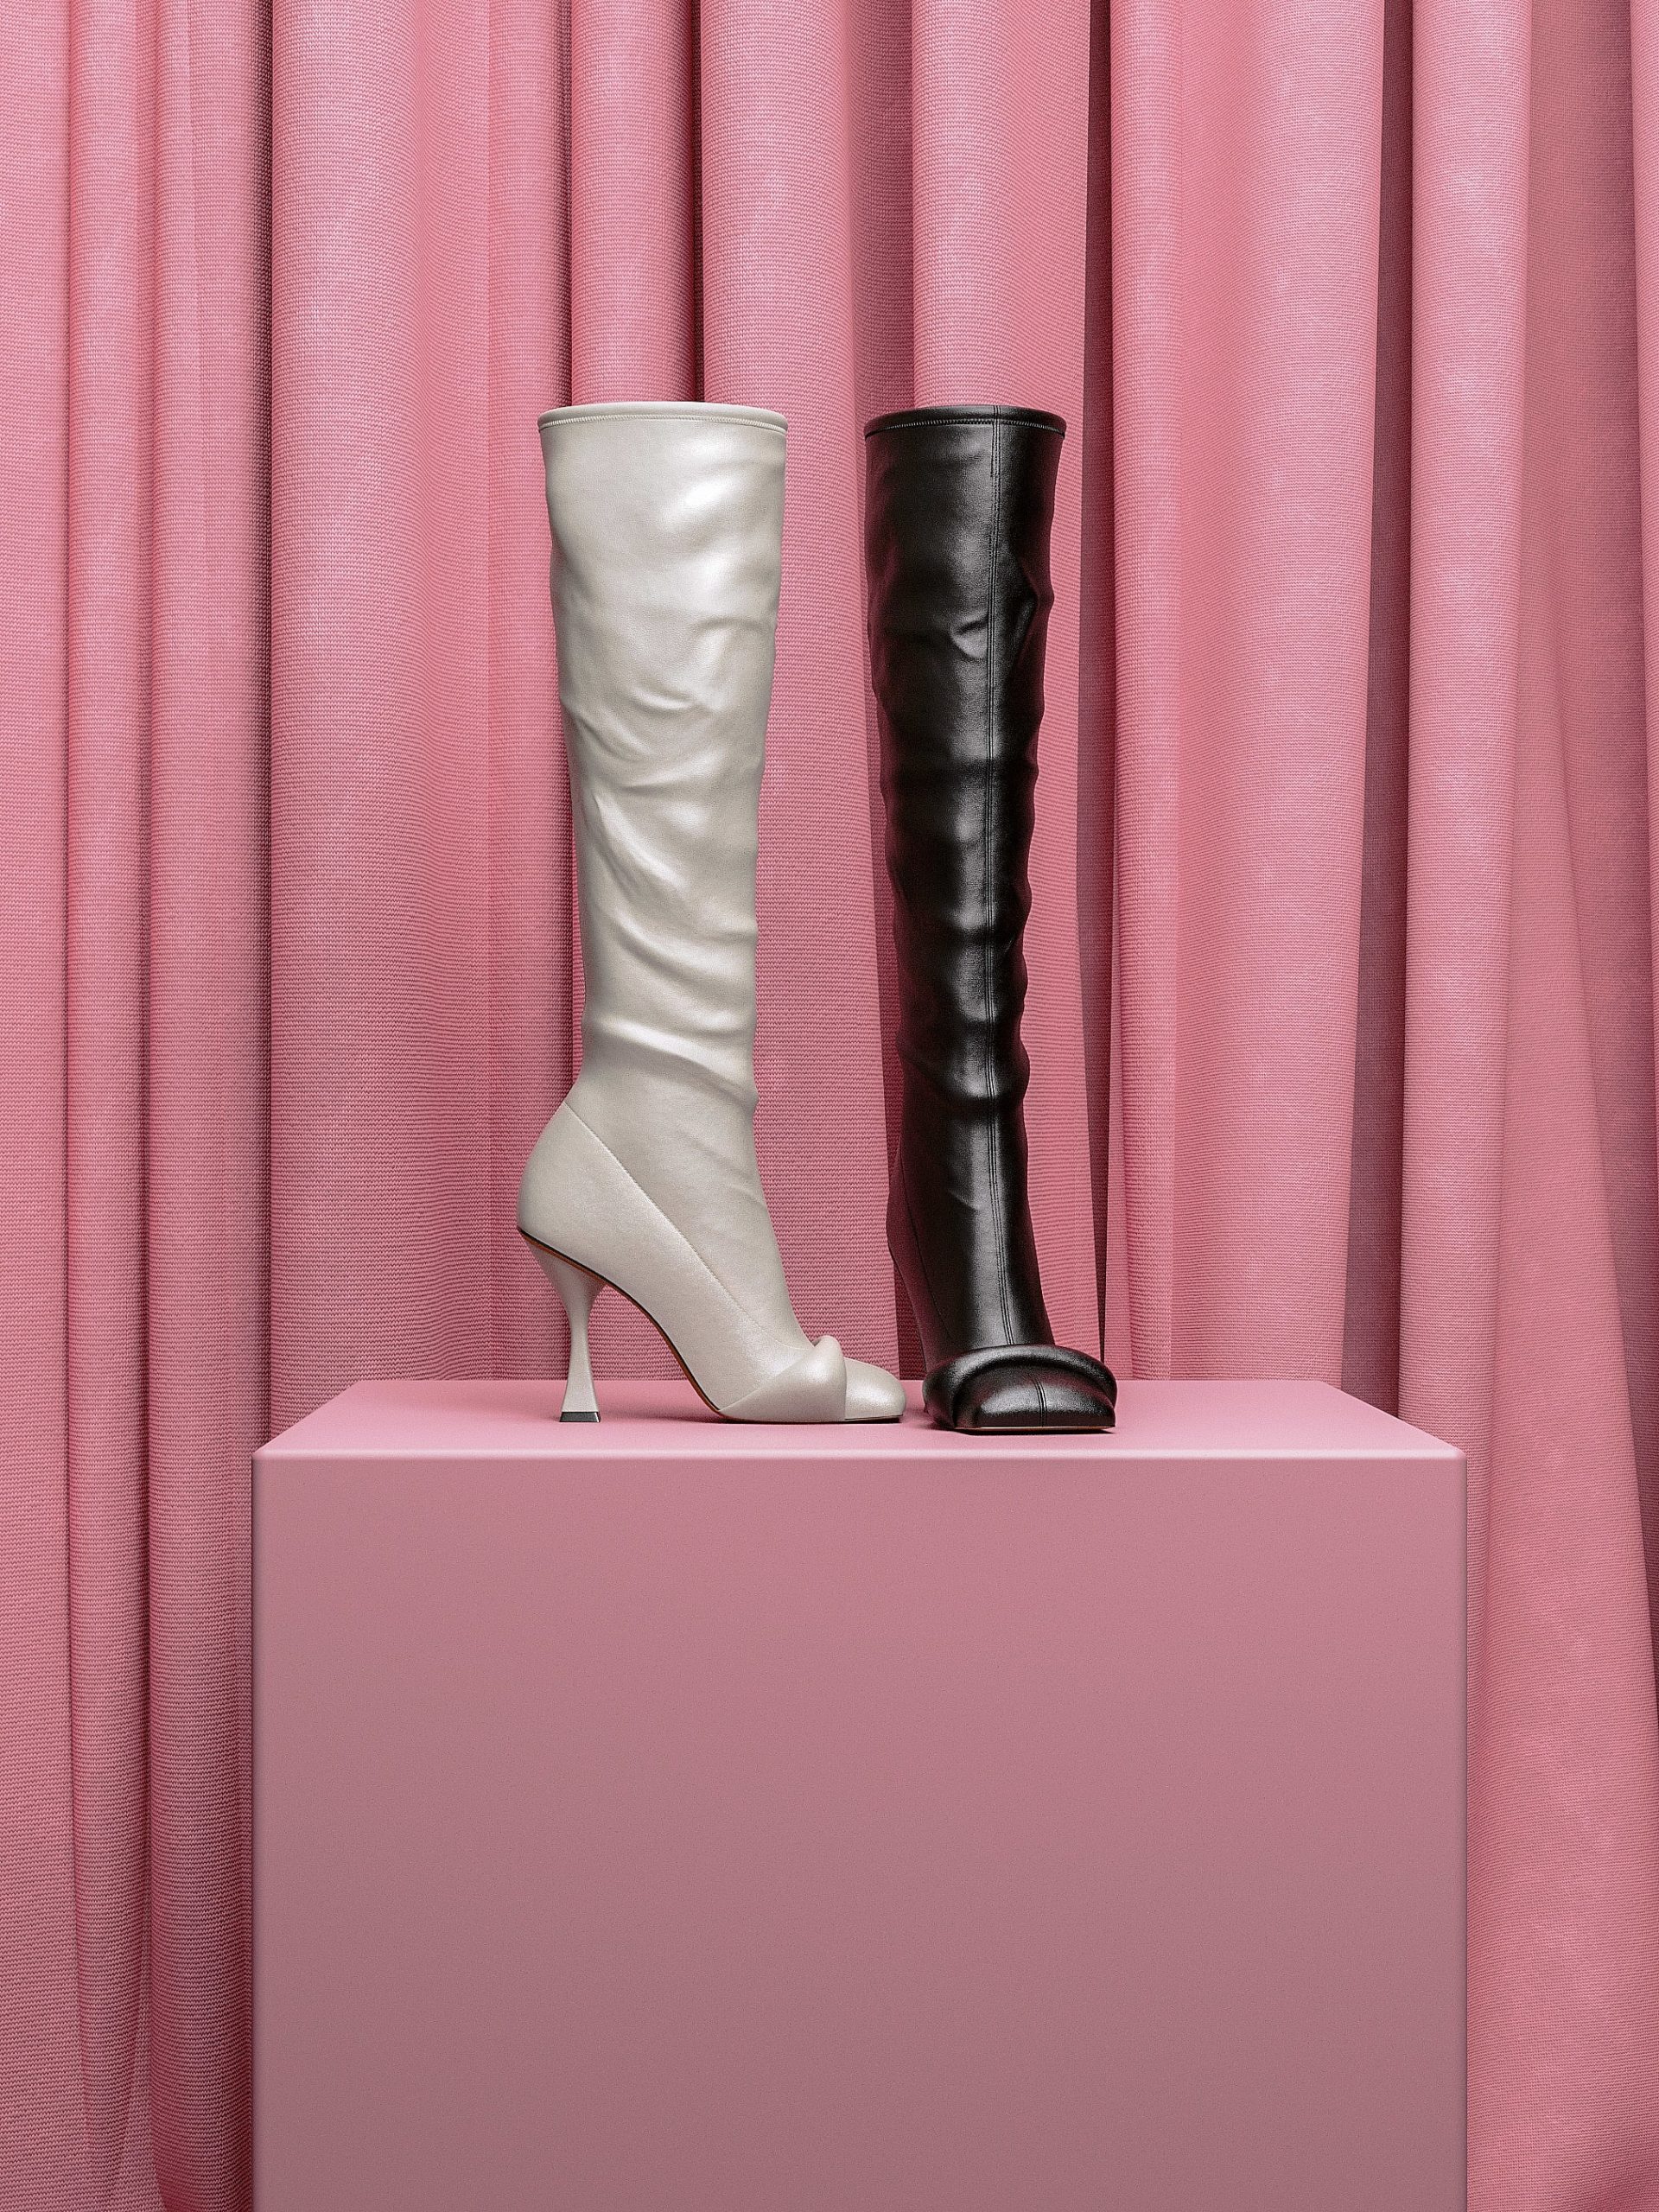  The Zoe boot is available for pre-order in Bone and Black for $659.